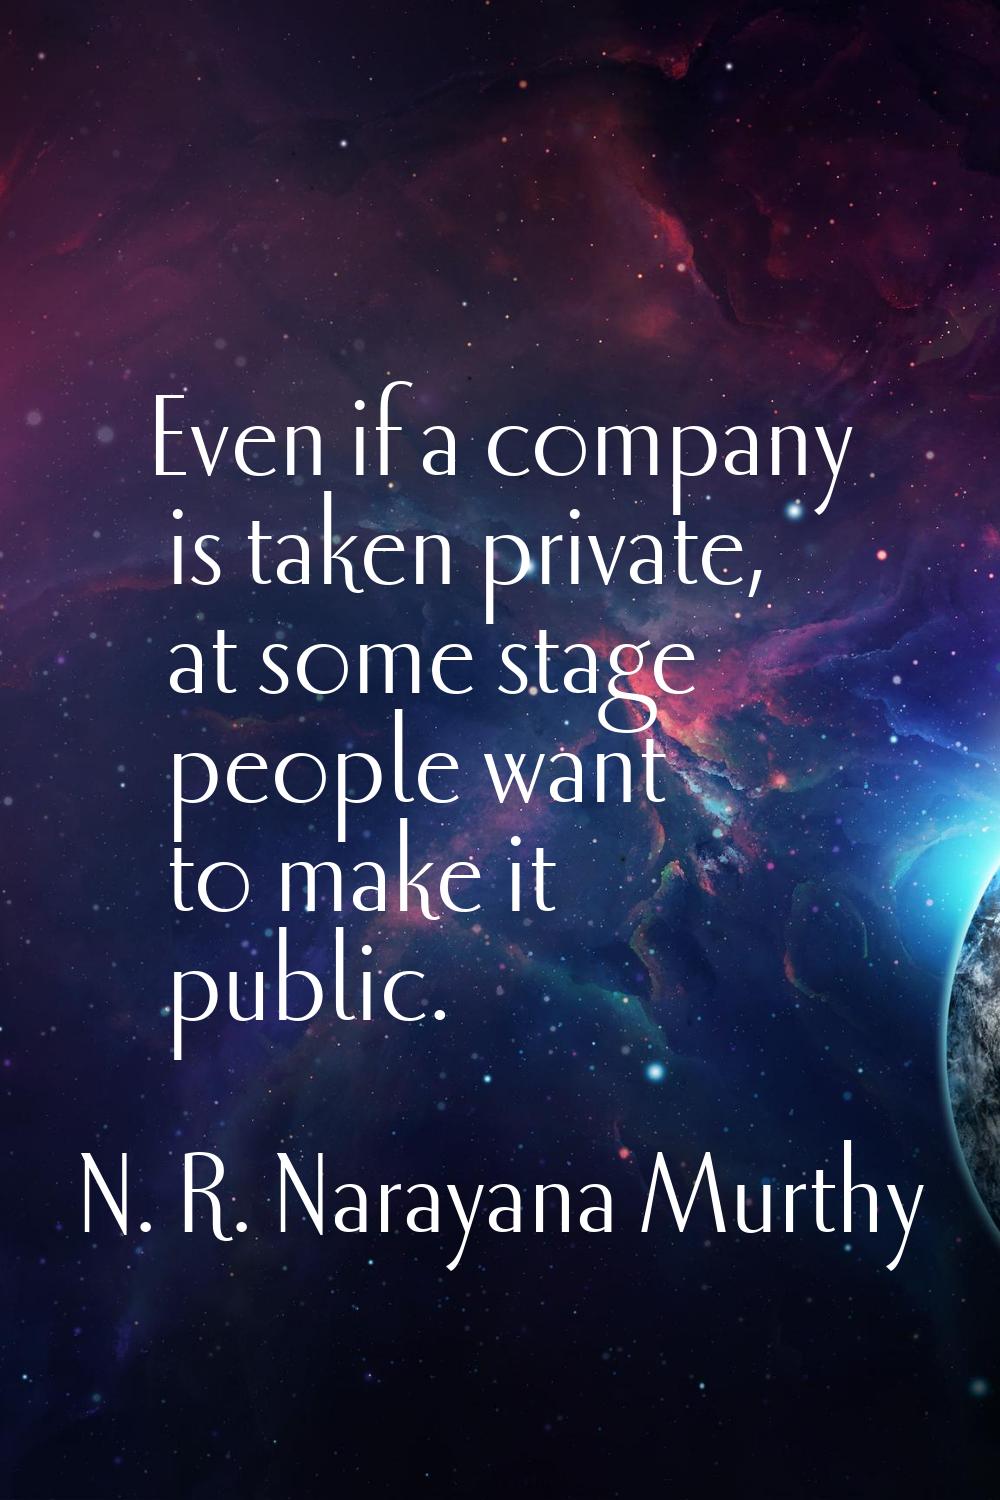 Even if a company is taken private, at some stage people want to make it public.